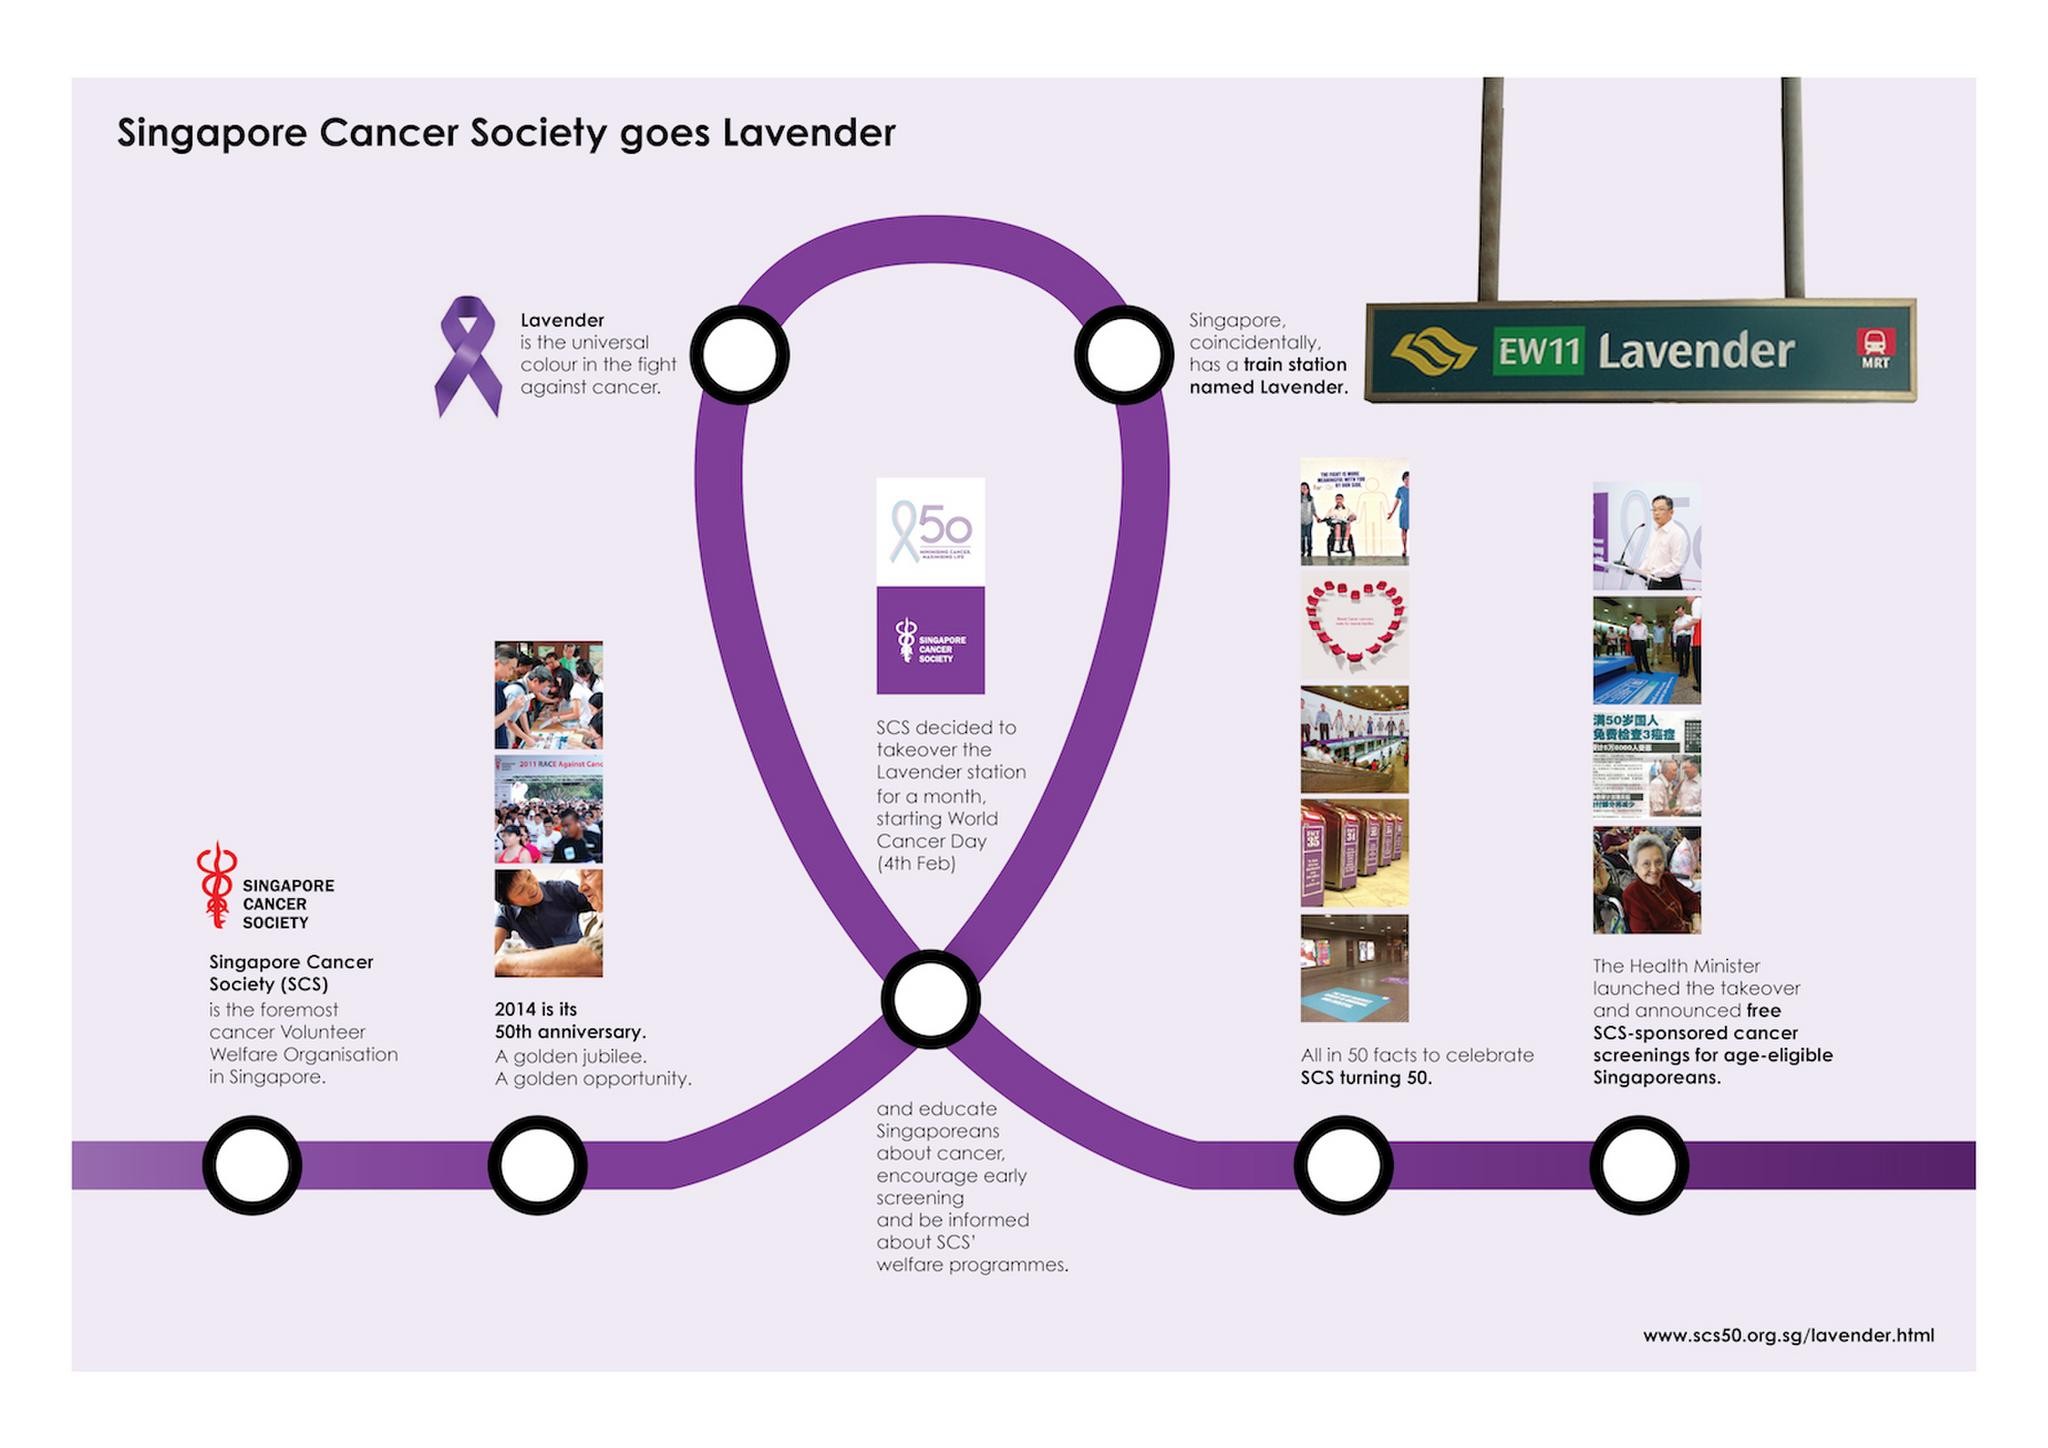 SINGAPORE CANCER SOCIETY GOES LAVENDER